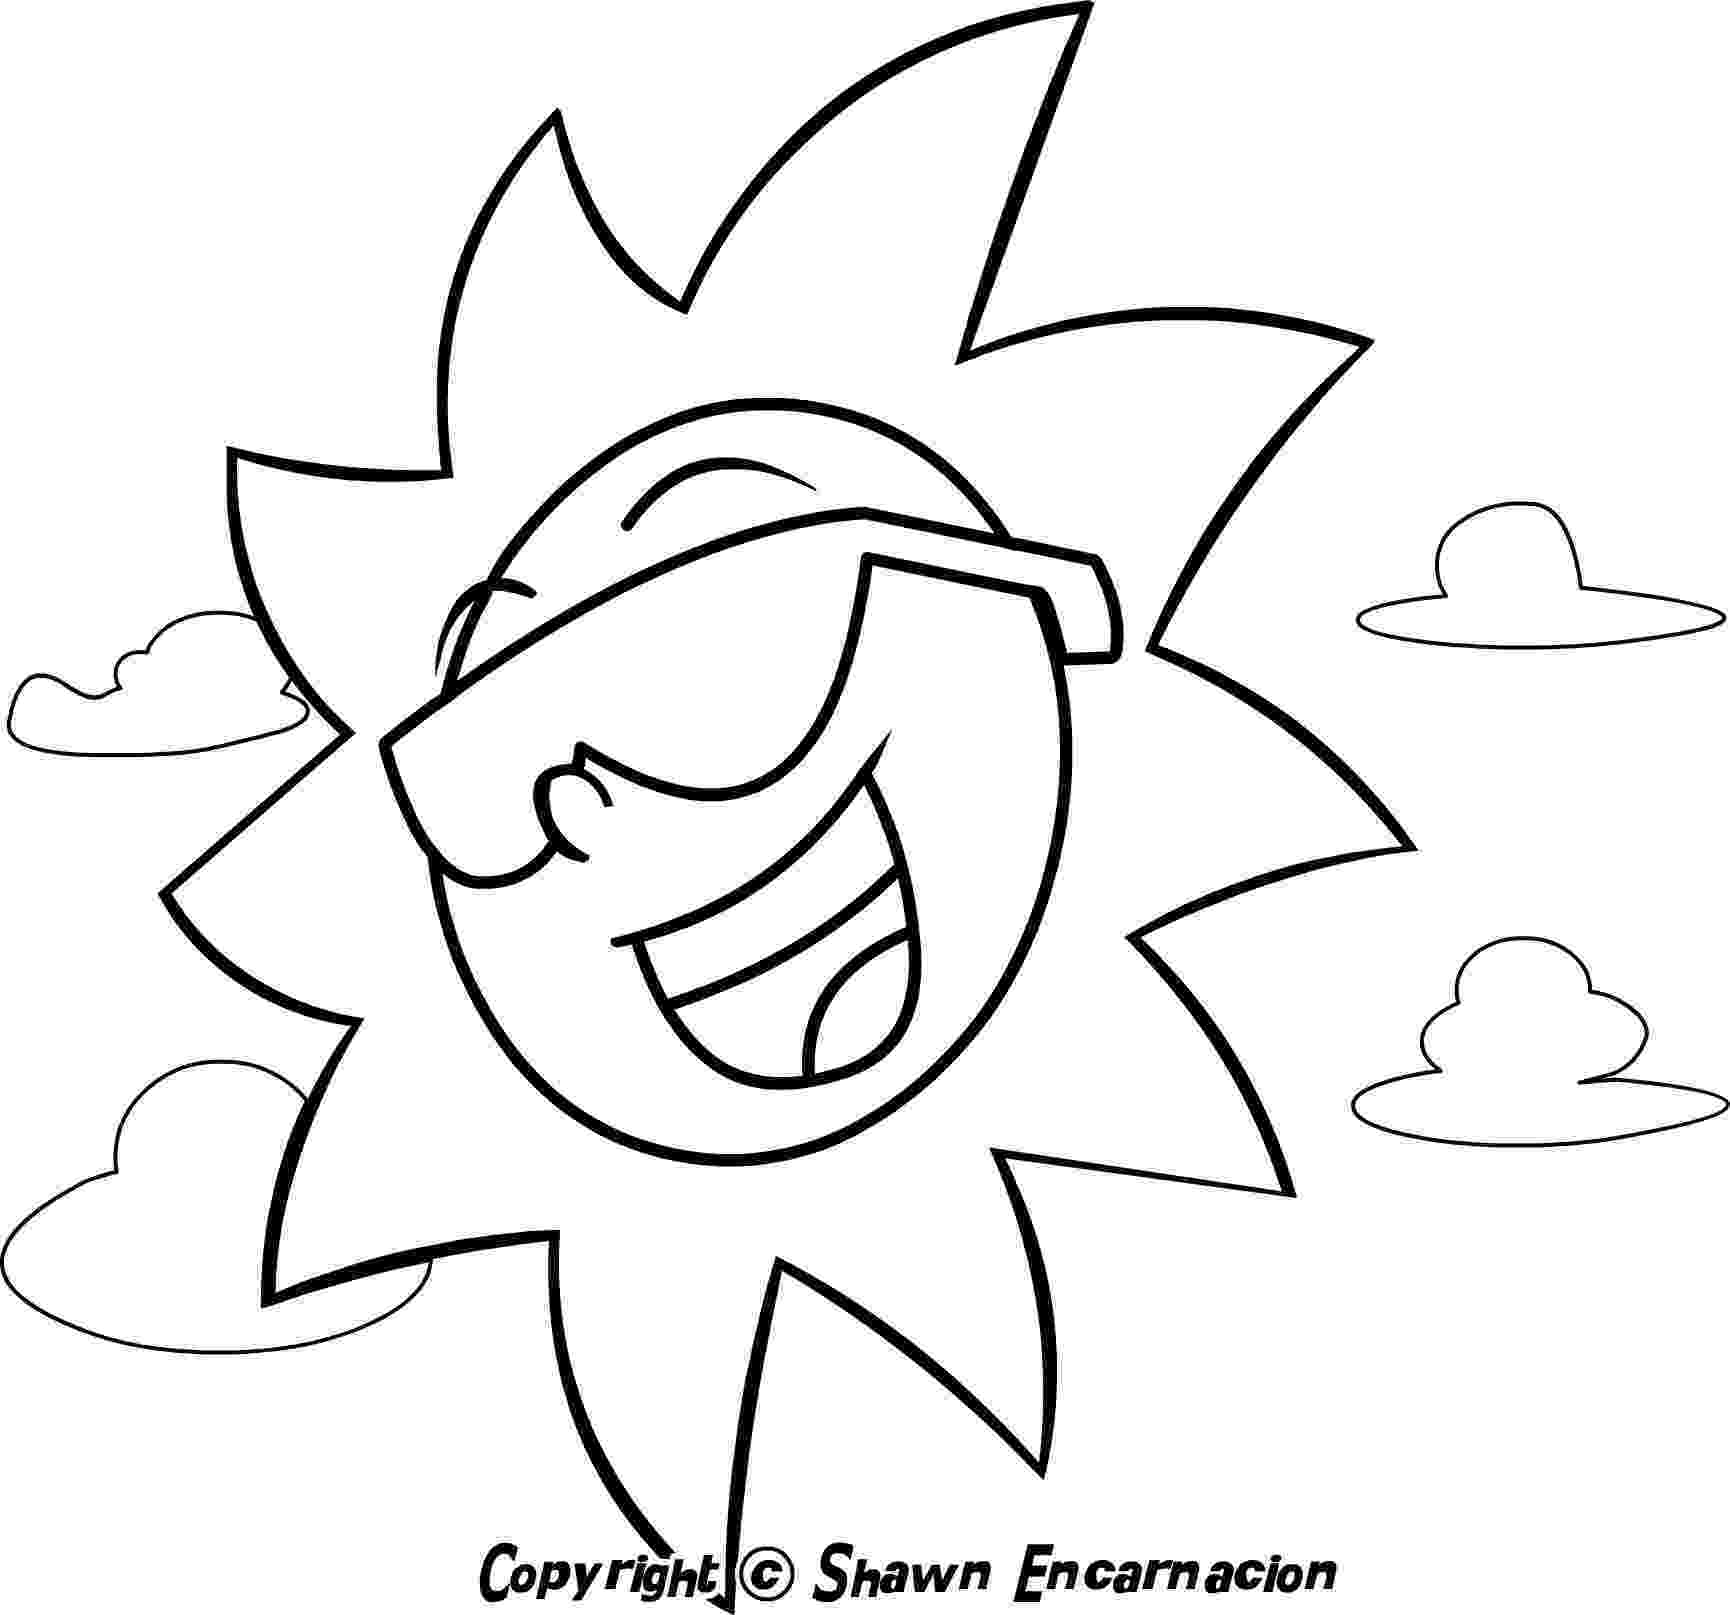 summer coloring pictures summer coloring pages download and print summer coloring coloring pictures summer 